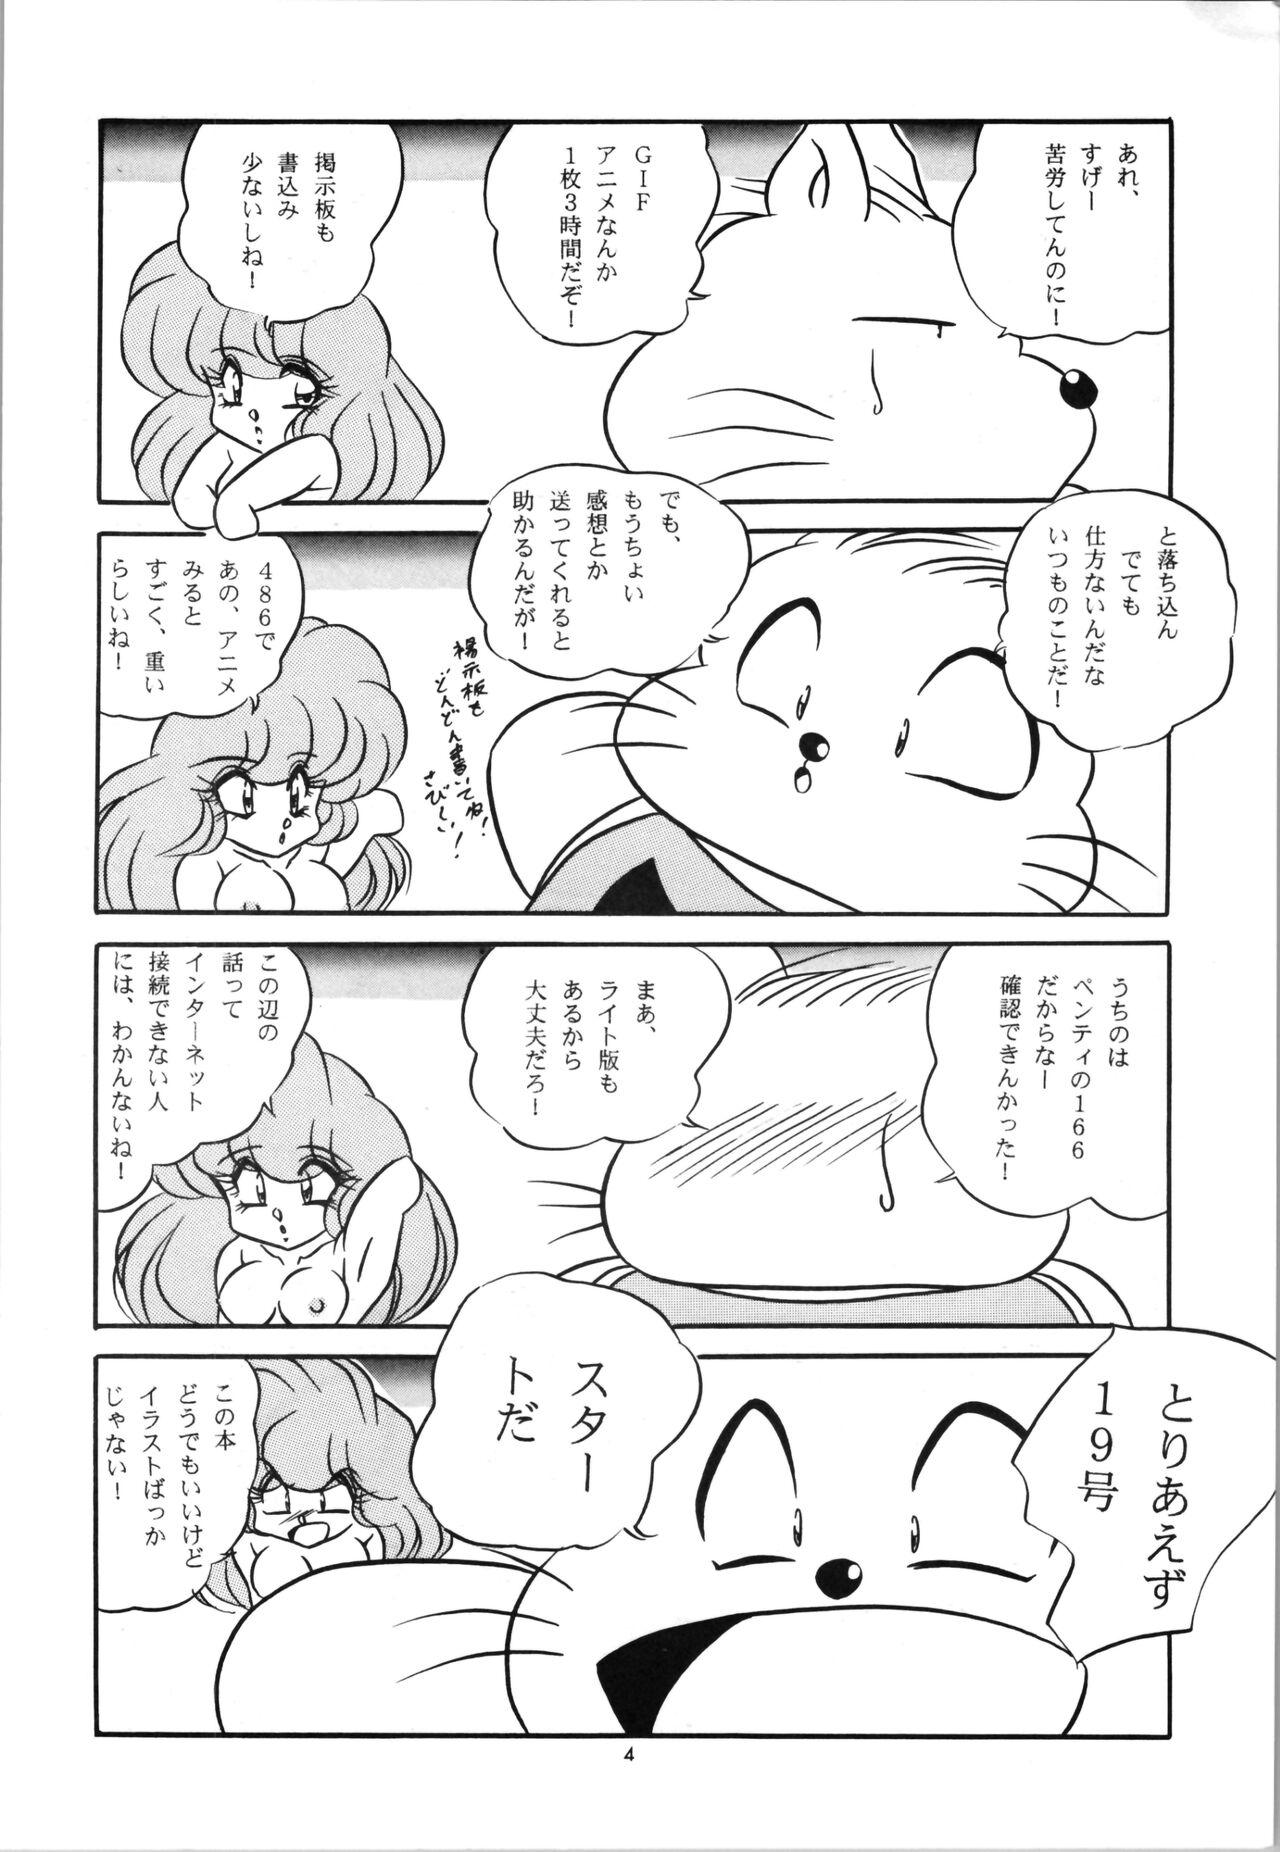 Bj C-COMPANY SPECIAL STAGE 19 - Ranma 12 Culito - Page 6